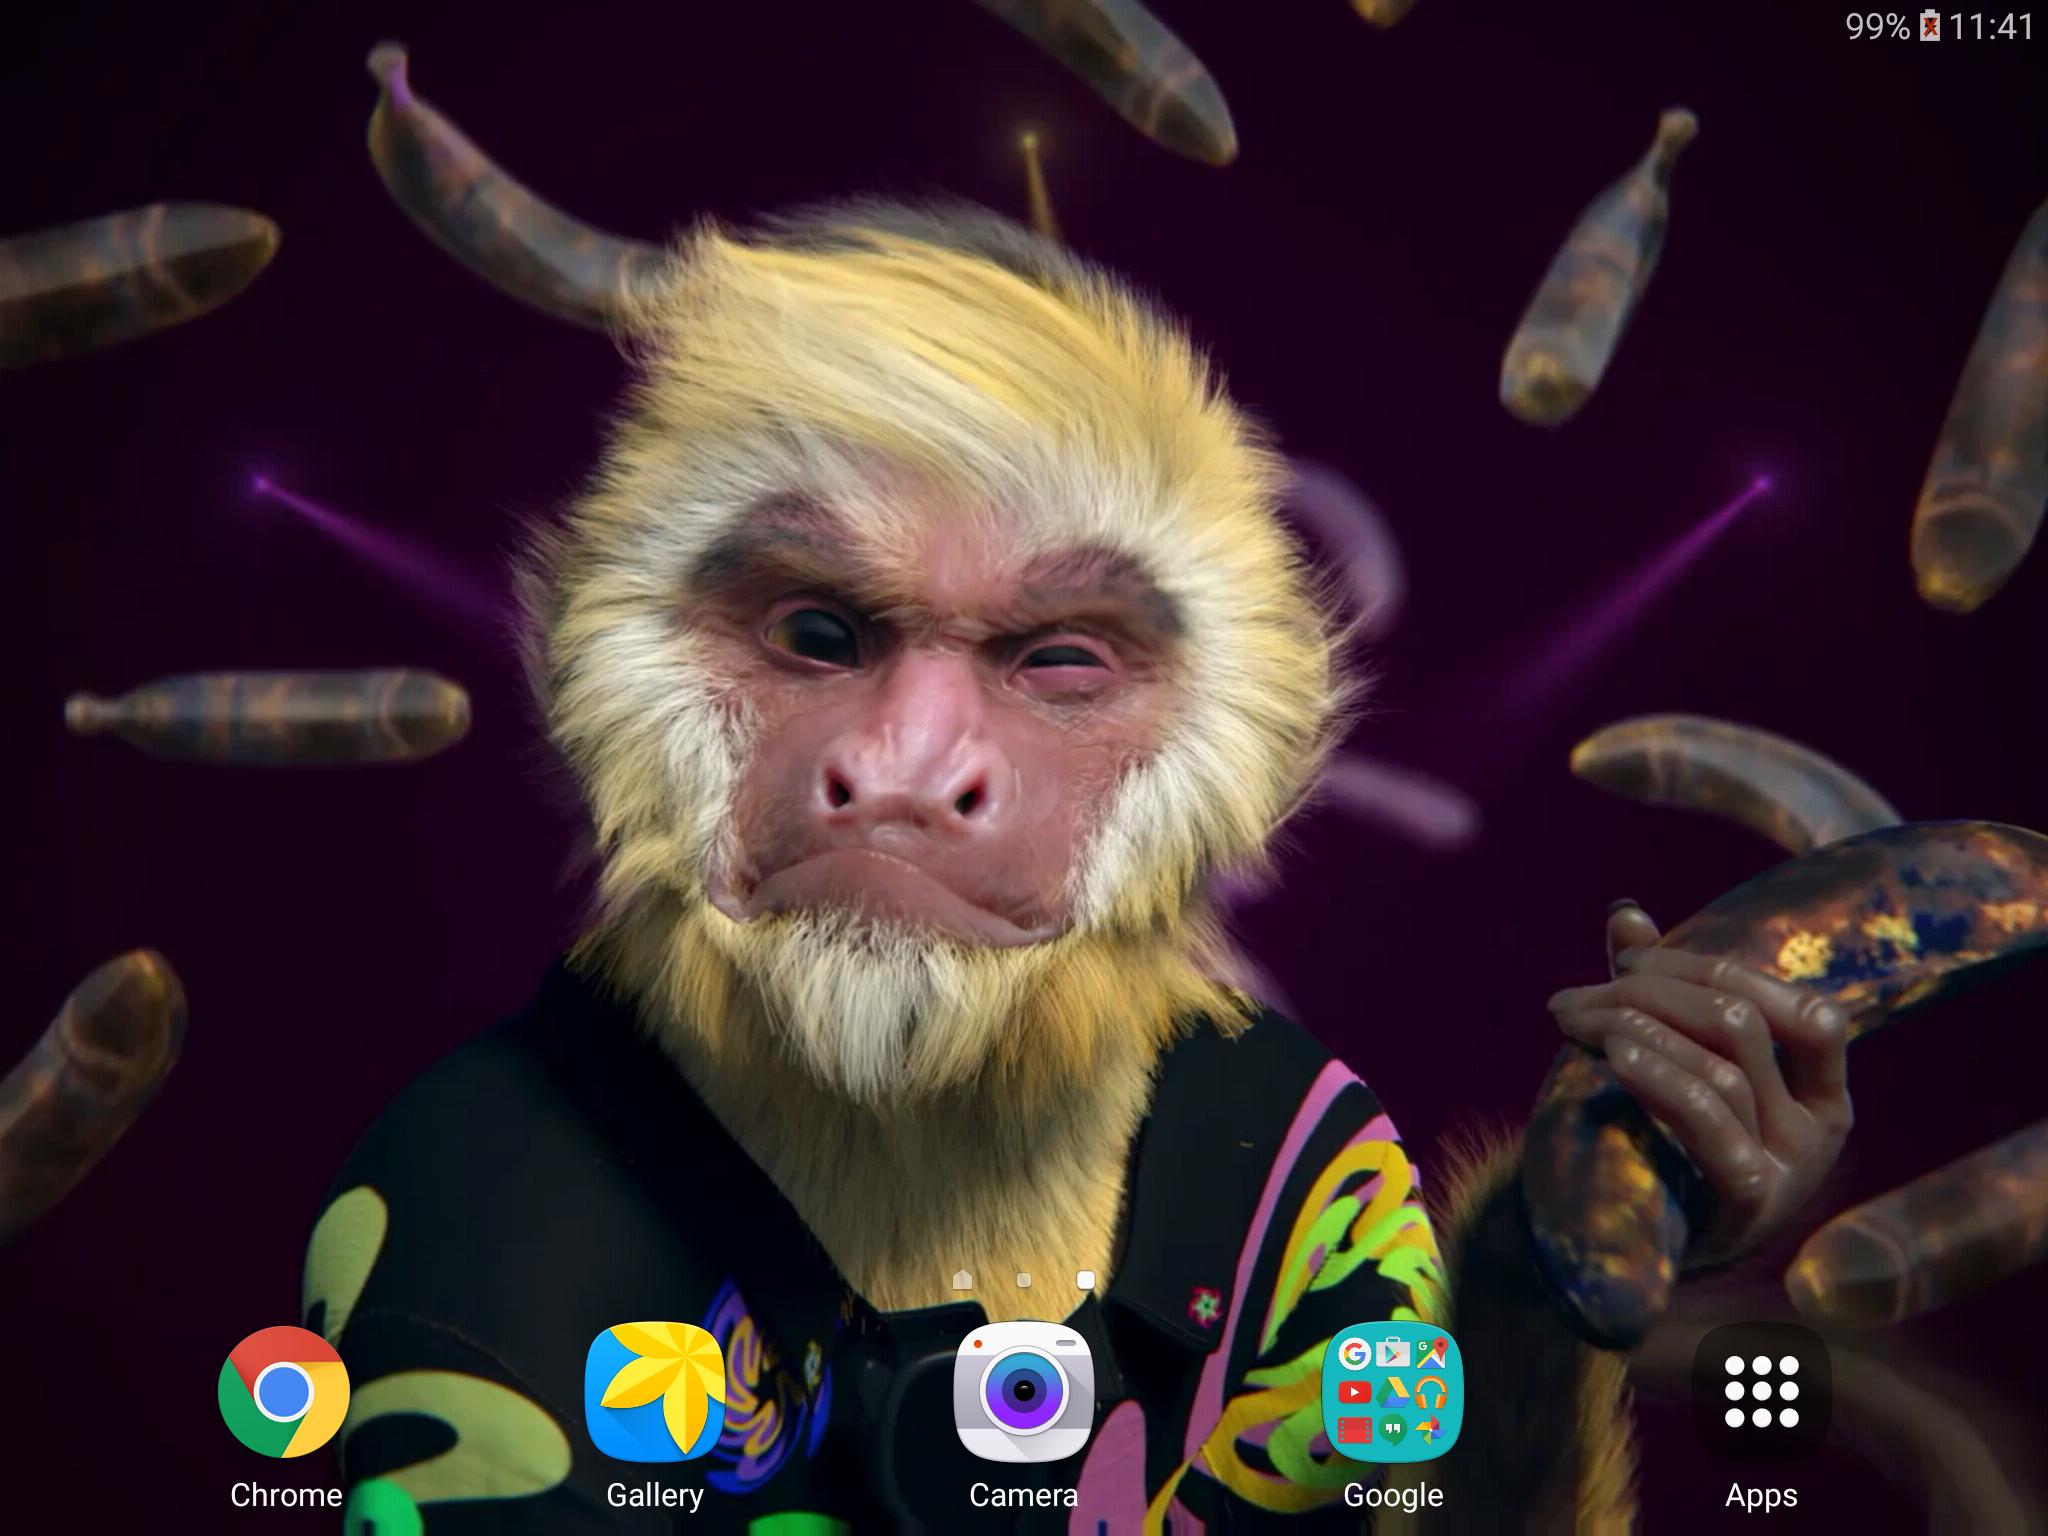 Dance Monkey 4K Live Wallpaper for Android - APK Download
